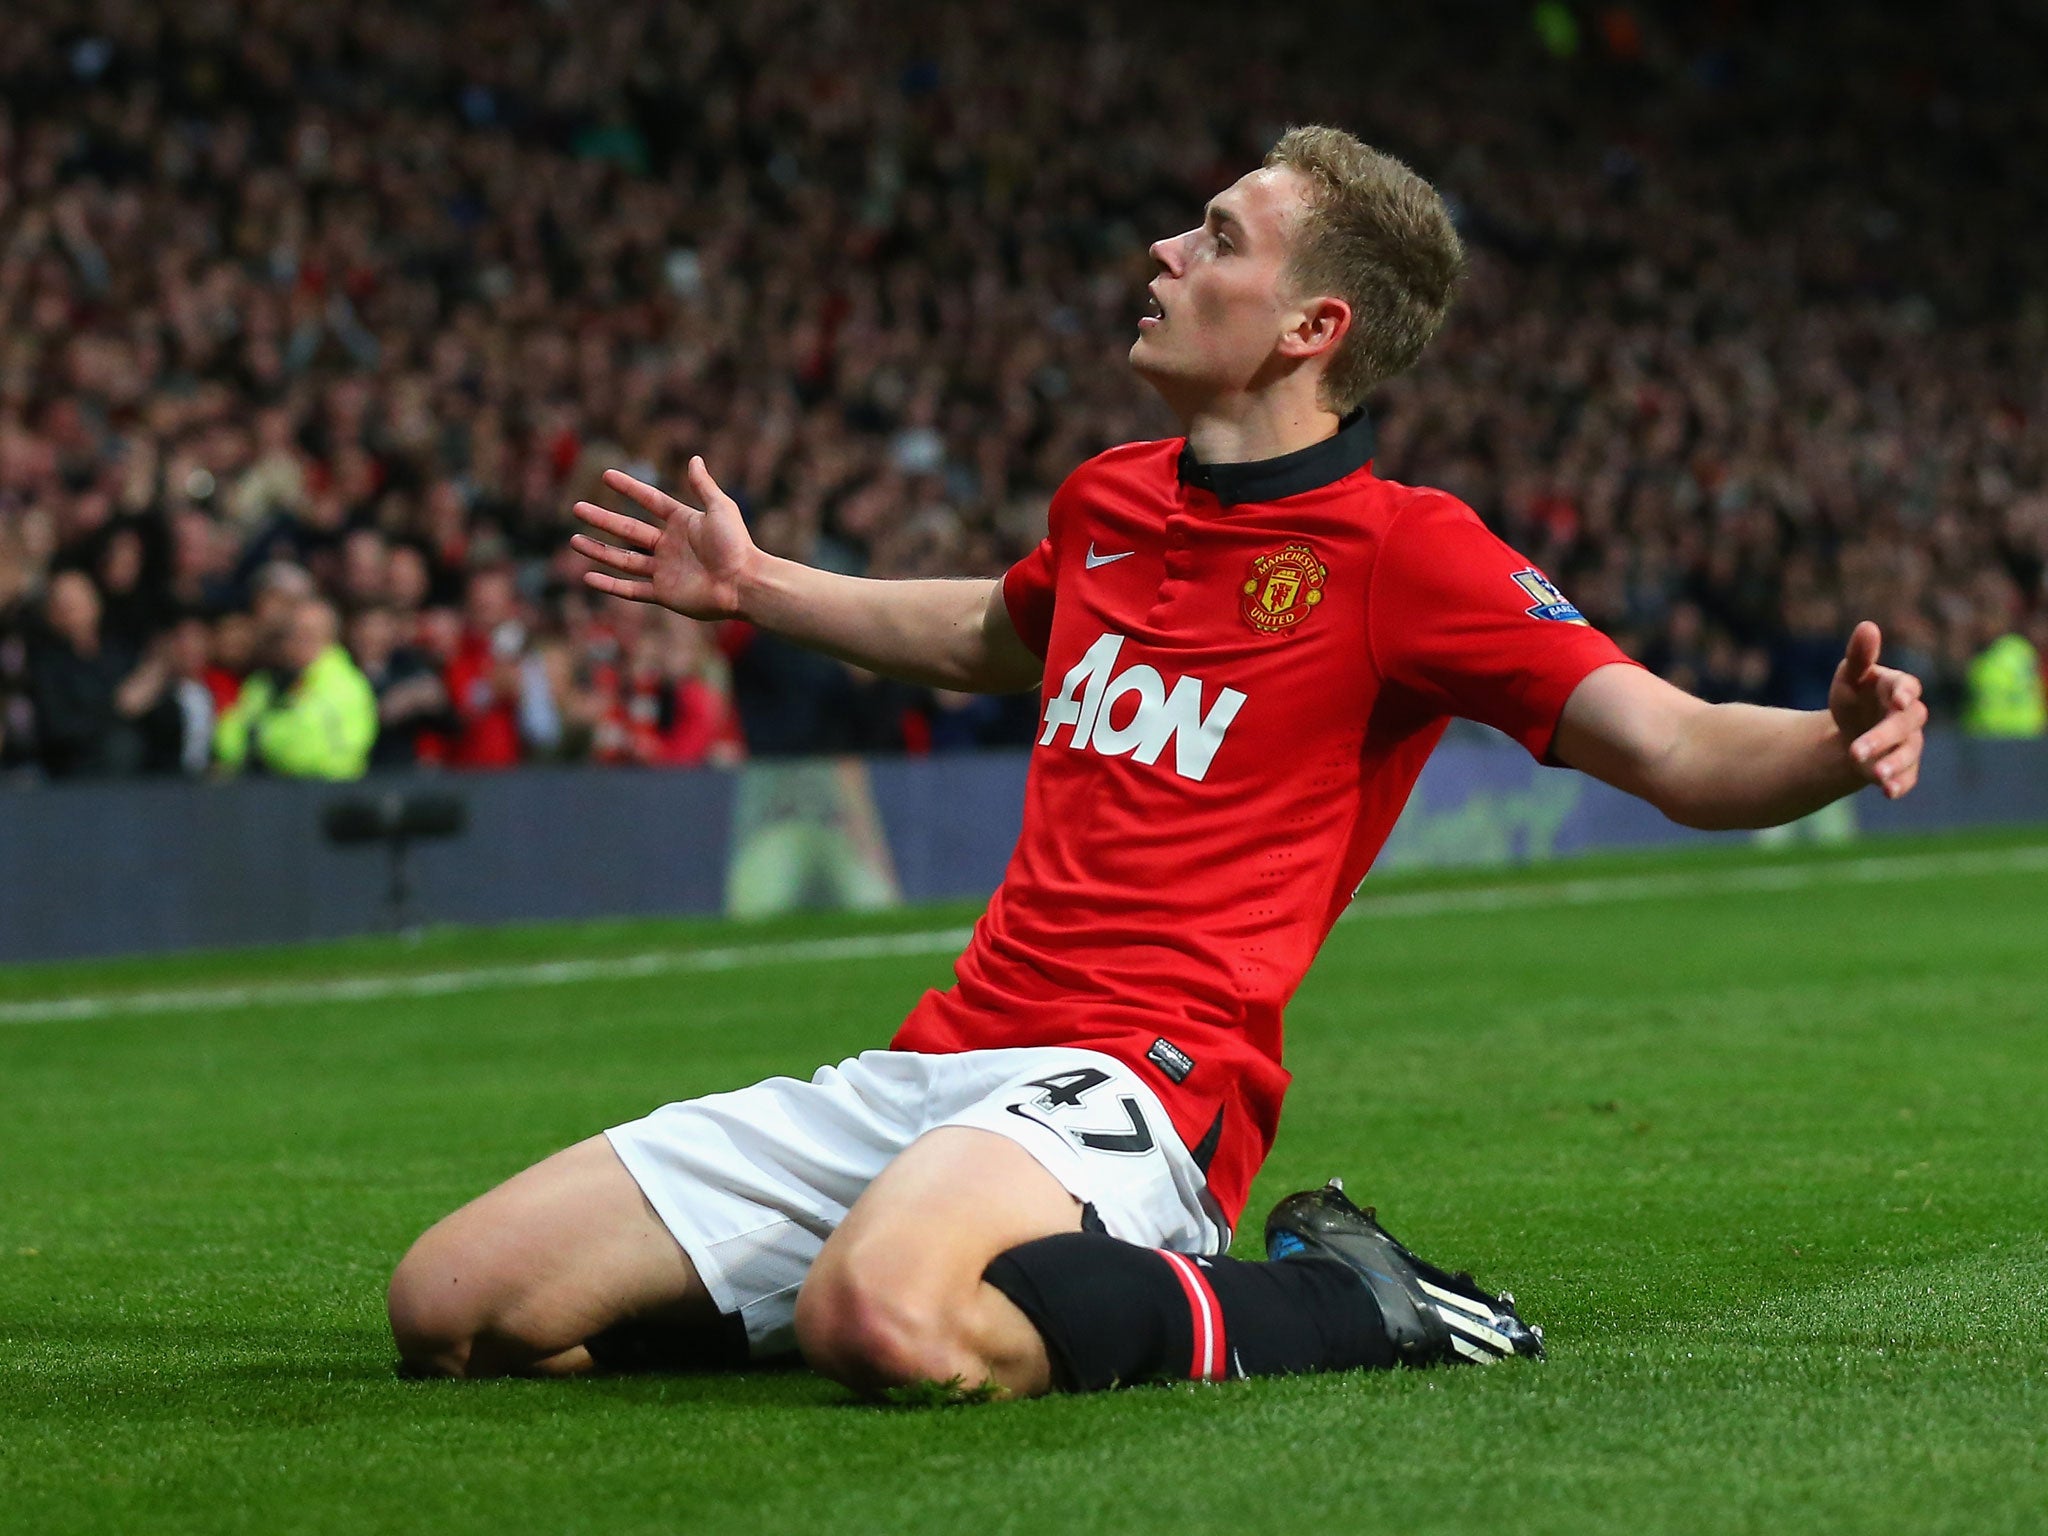 James Wilson celebrates his first goal for Manchester United